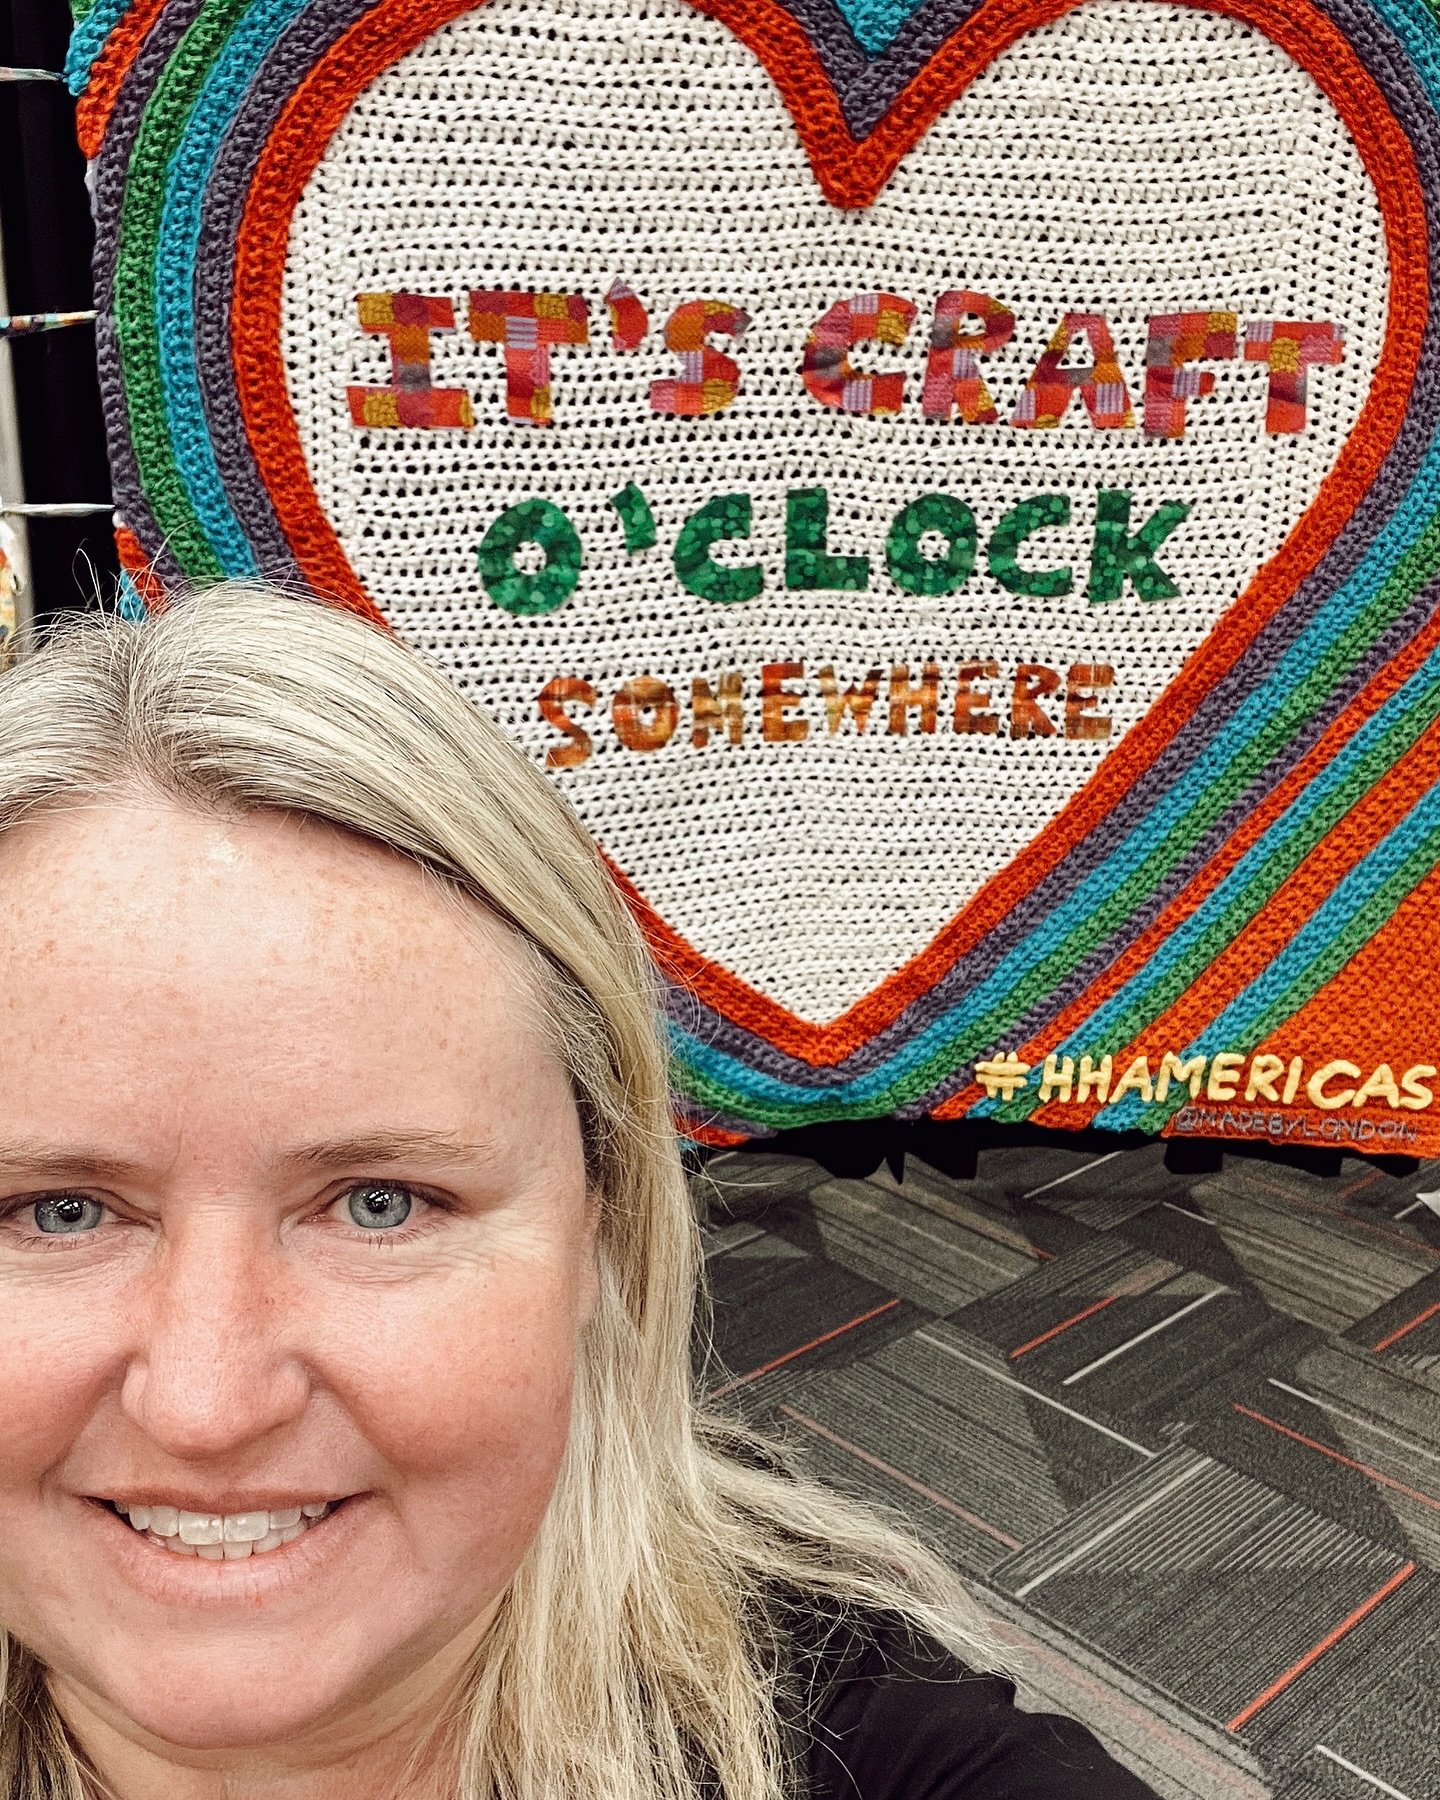 Here&rsquo;s a slogan I can get behind! 

My first quilt/fiber retail show and it was overwhelming and inspiring. Can&rsquo;t wait to add some of the new things I found to the shop and also got some fun ideas for some demos and classes. 

@hhamericas